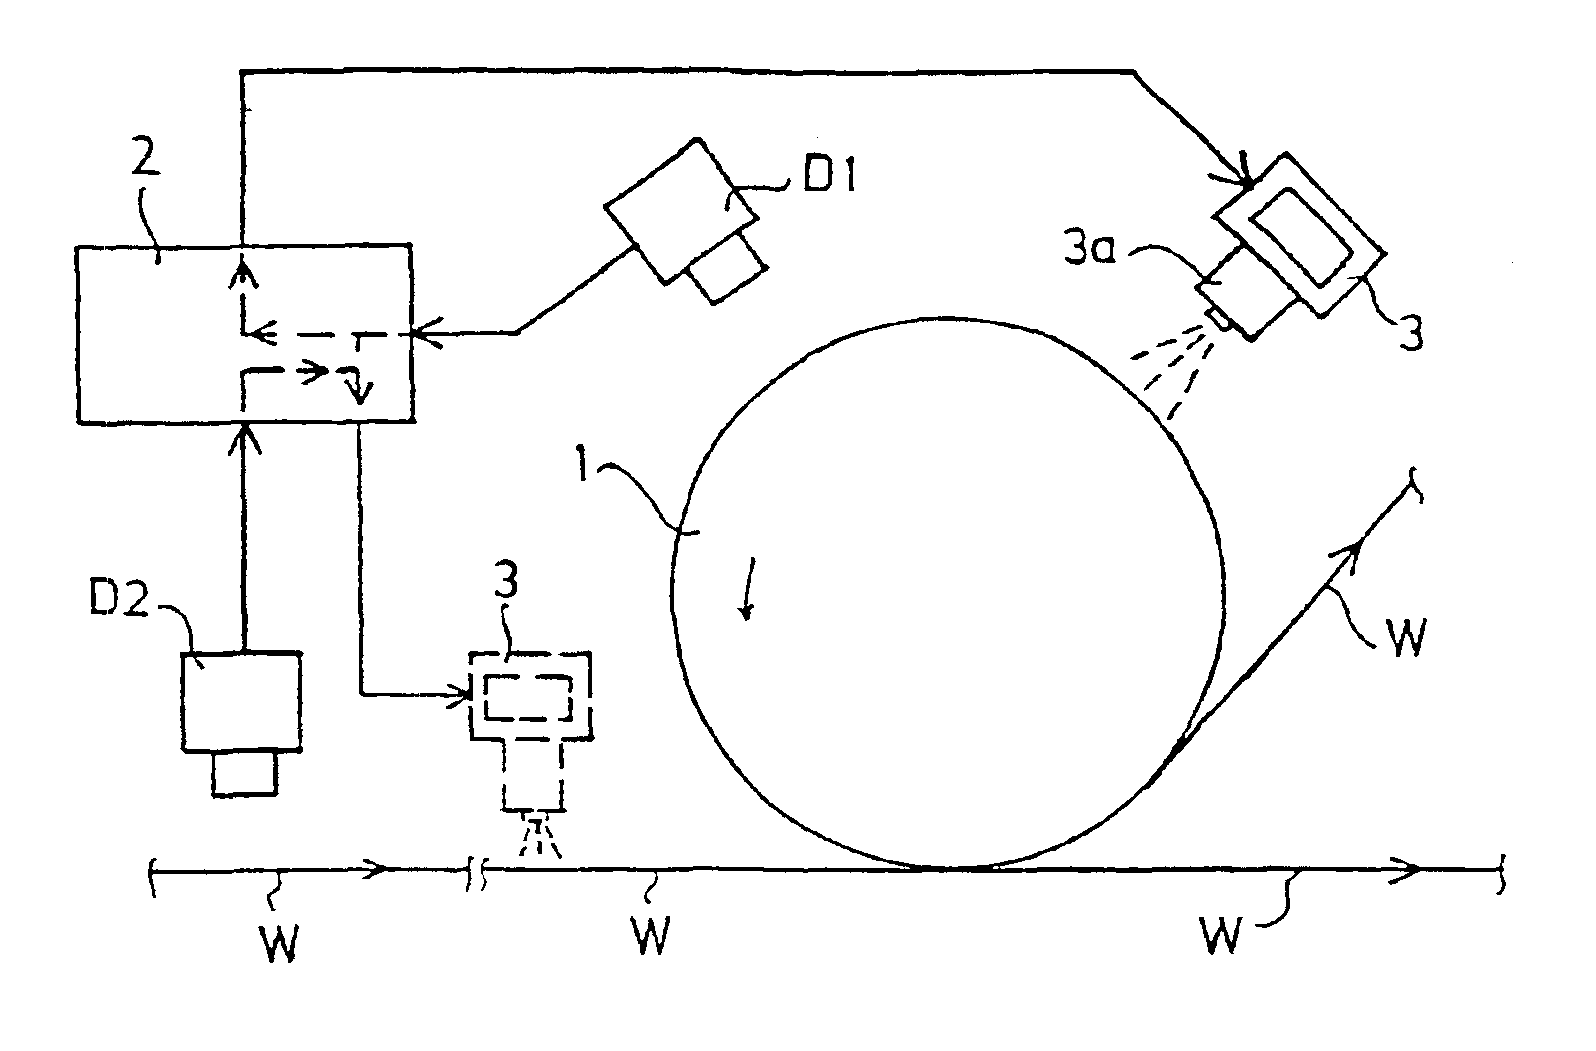 Method and equipment for cleaning and maintaining rolls